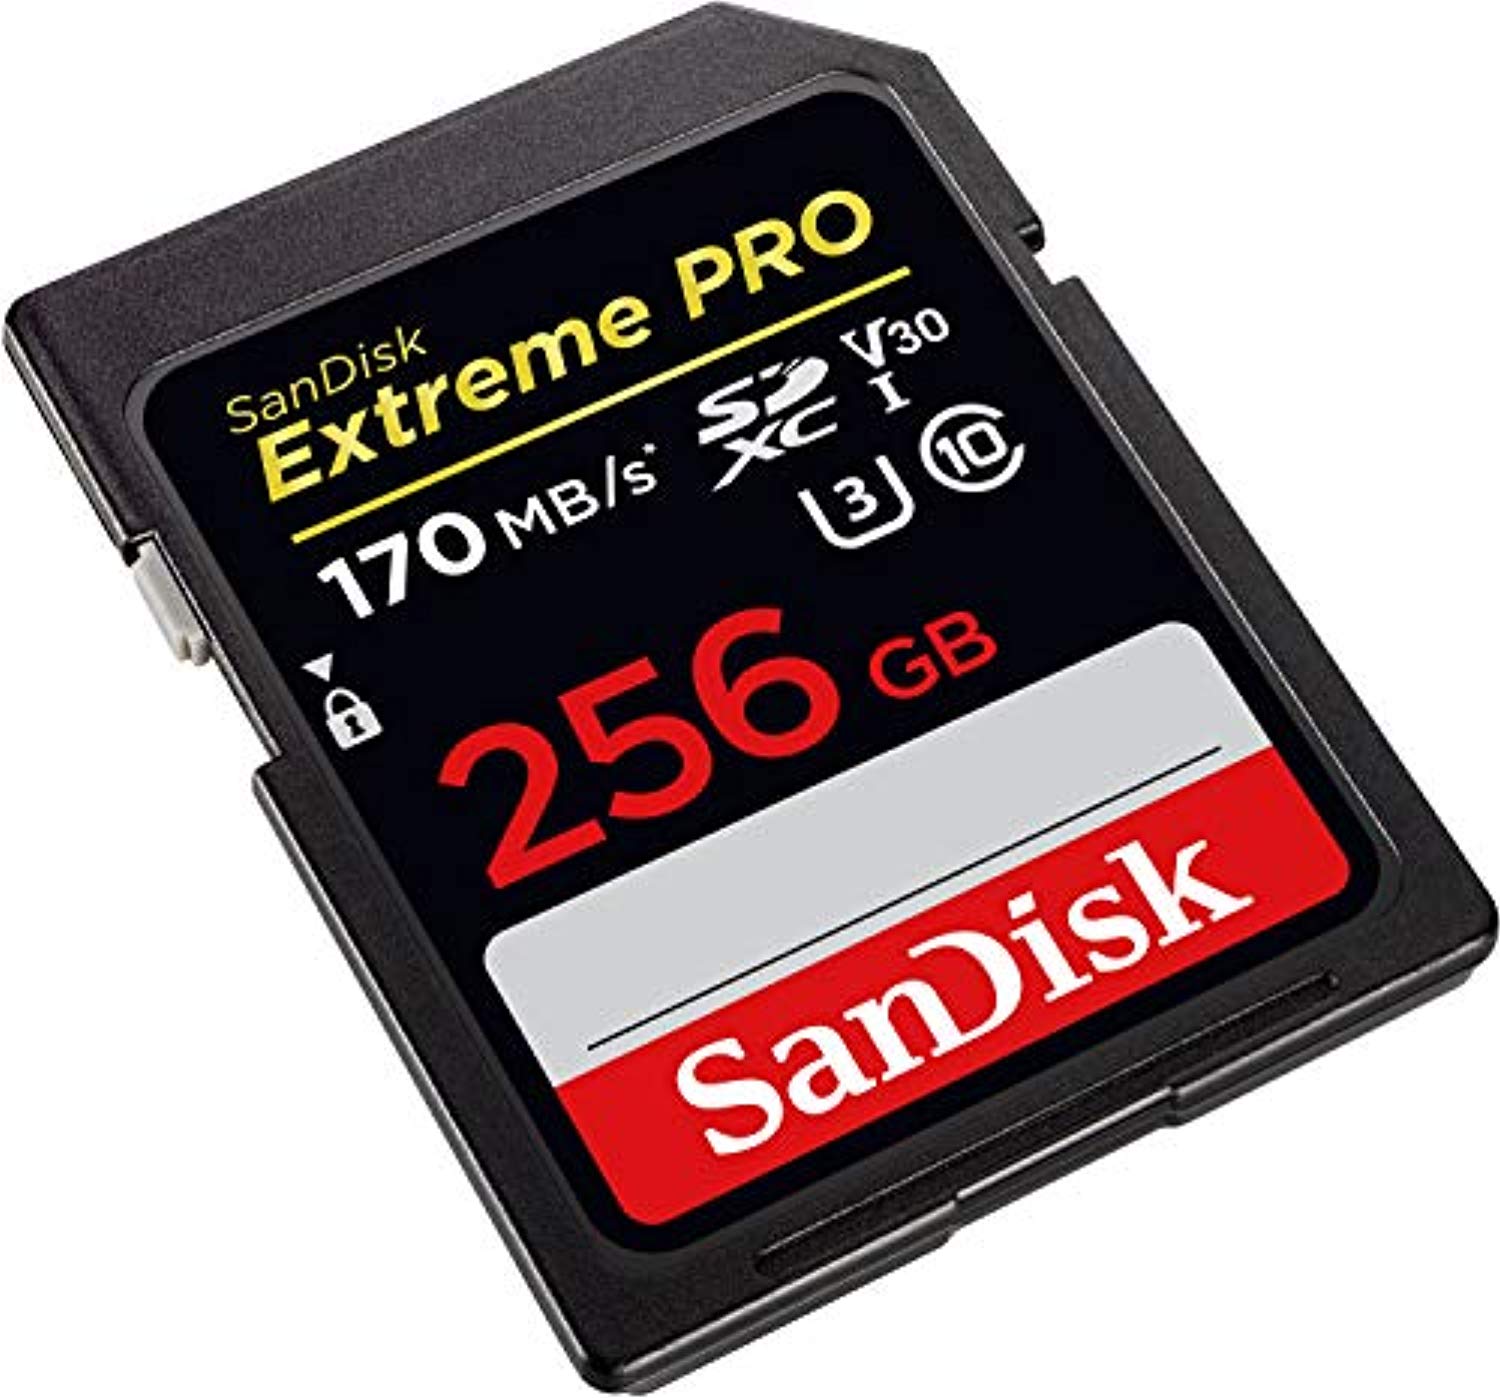 SanDisk Extreme PRO 256 GB SDXC Memory Card - Offer Games